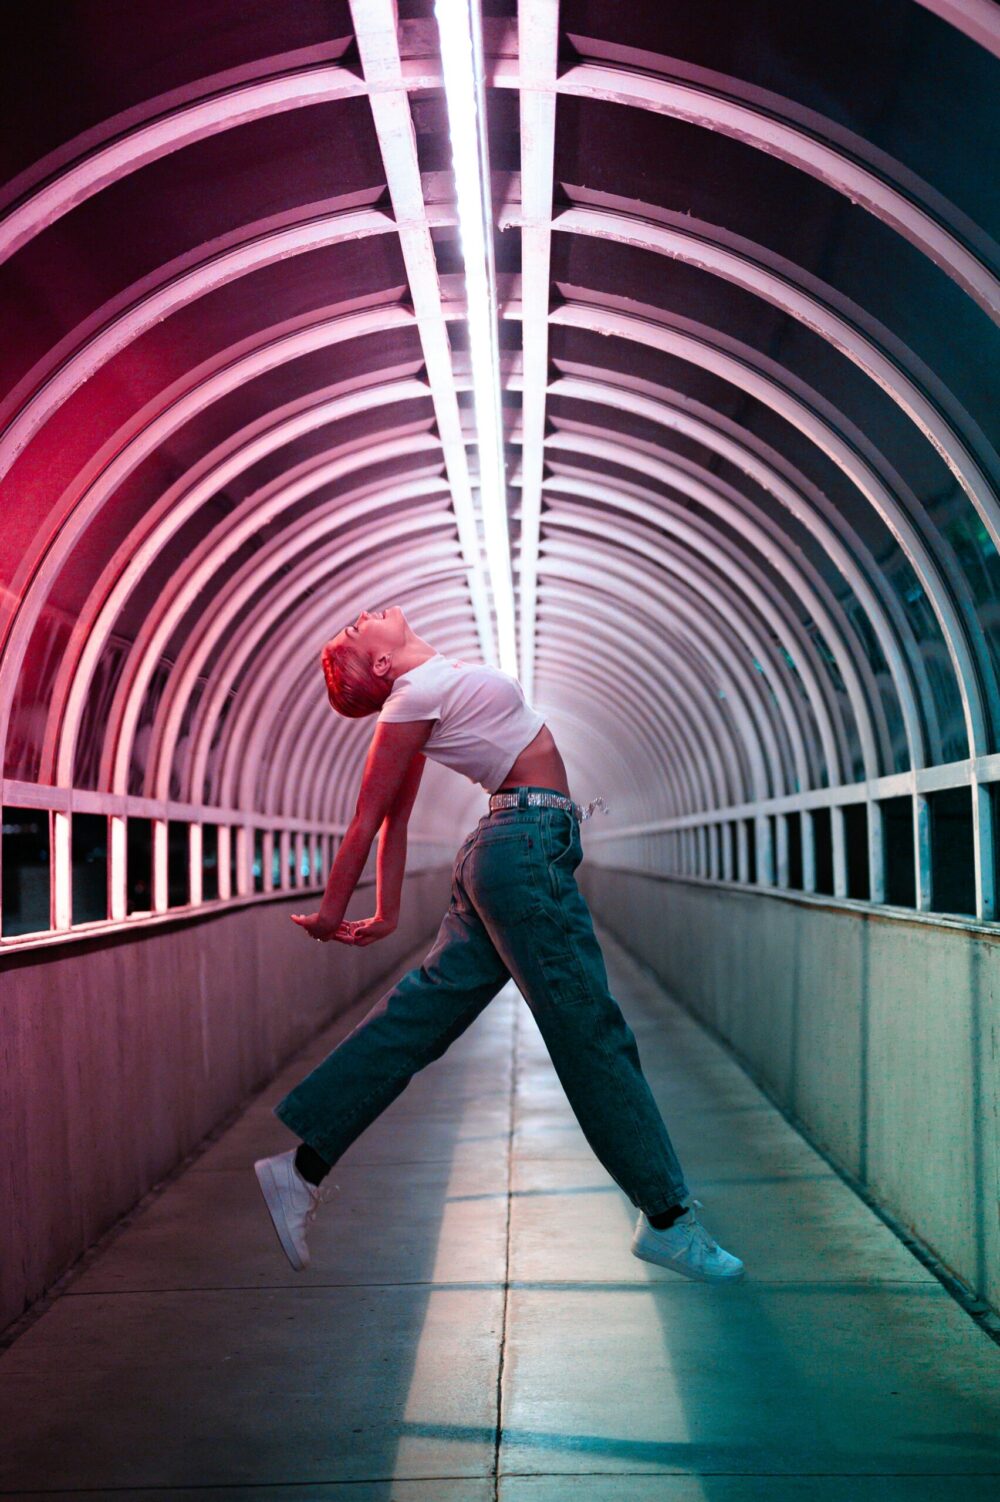 person dancing inside a walkway with neon lights on